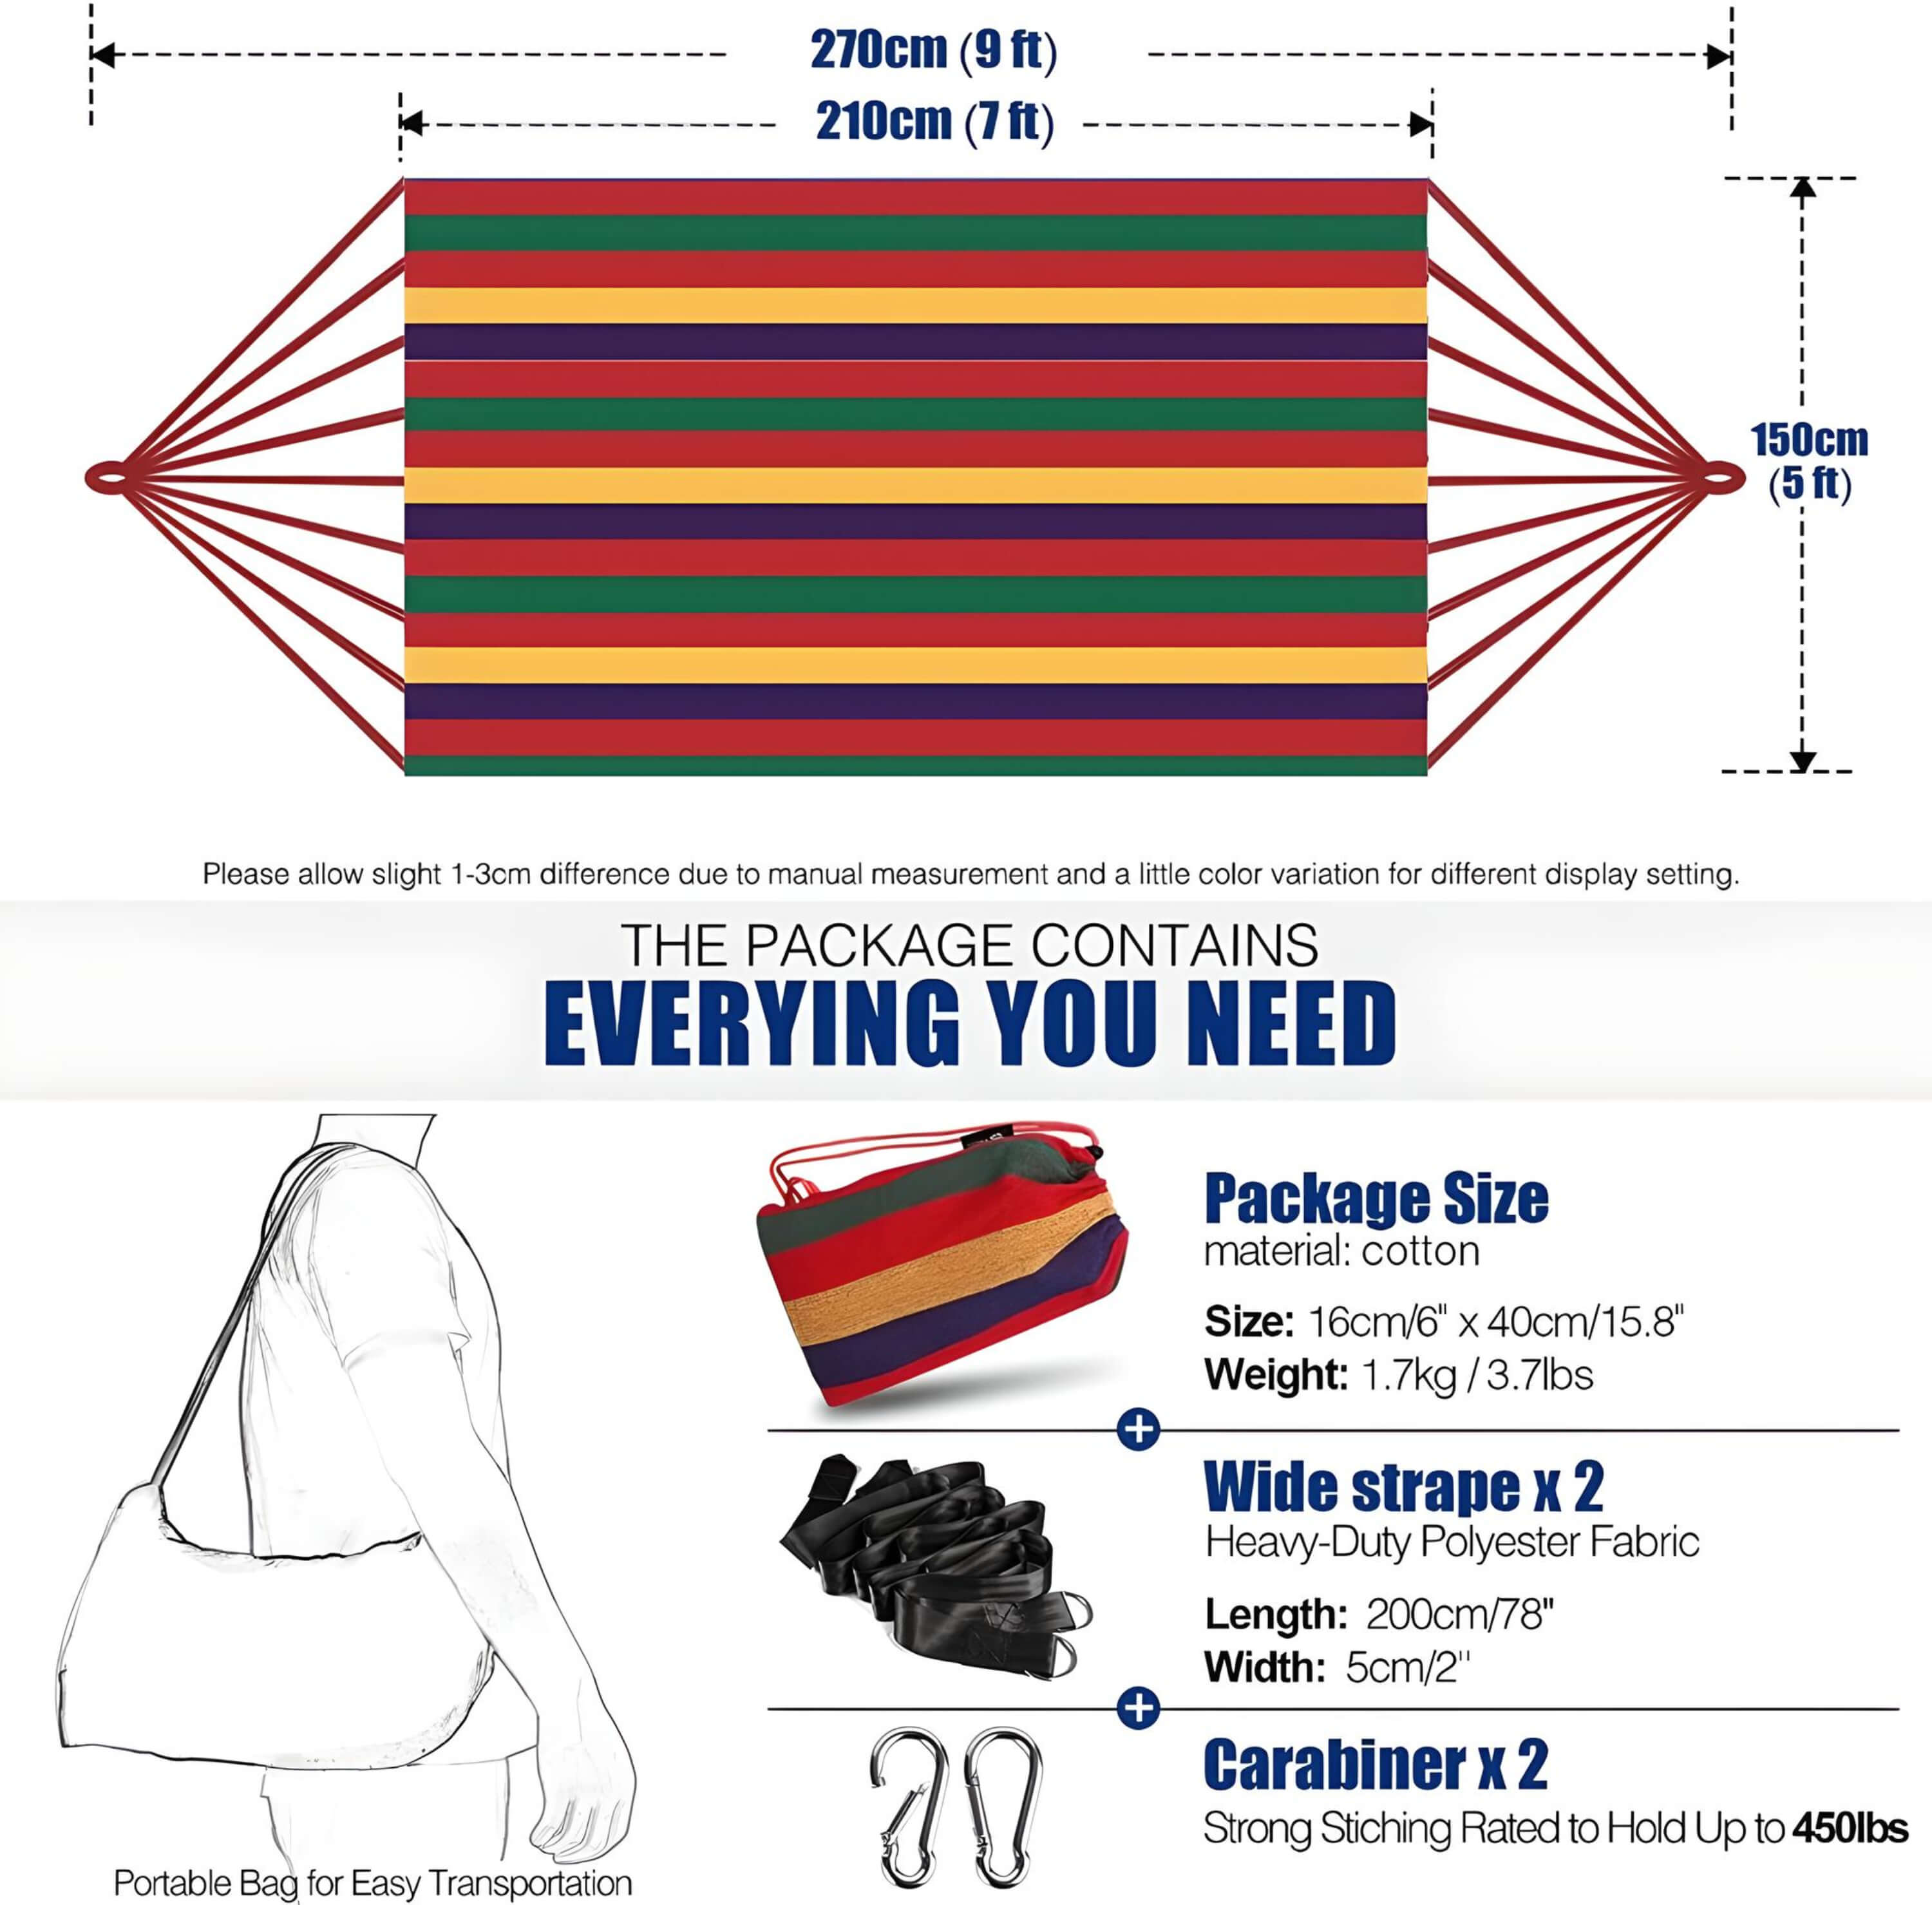 brazilian-style-hammock-pack-age-contains